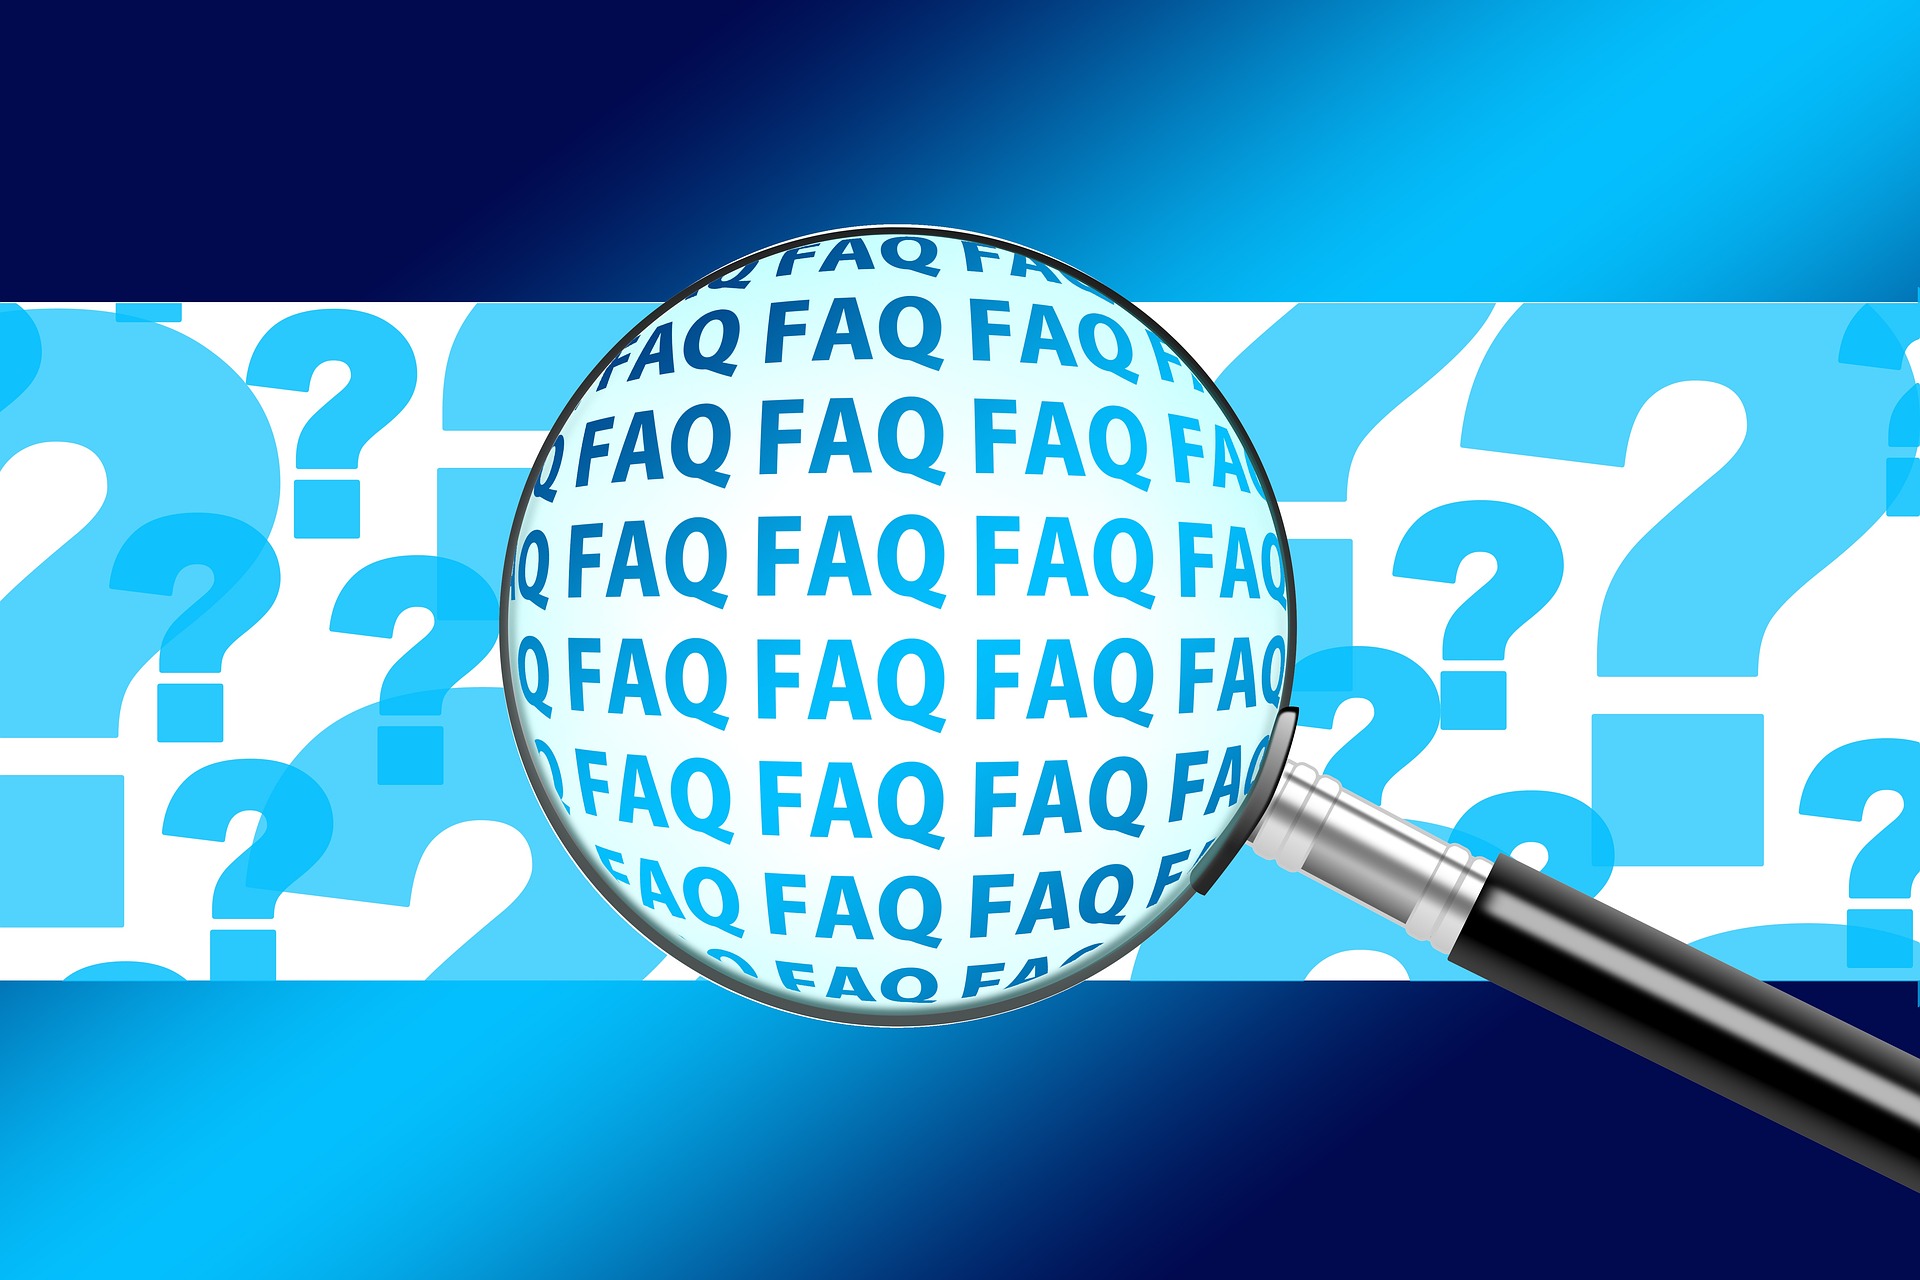 Häufige Fragen (Frequently asked questions - FAQ) © Pixabay